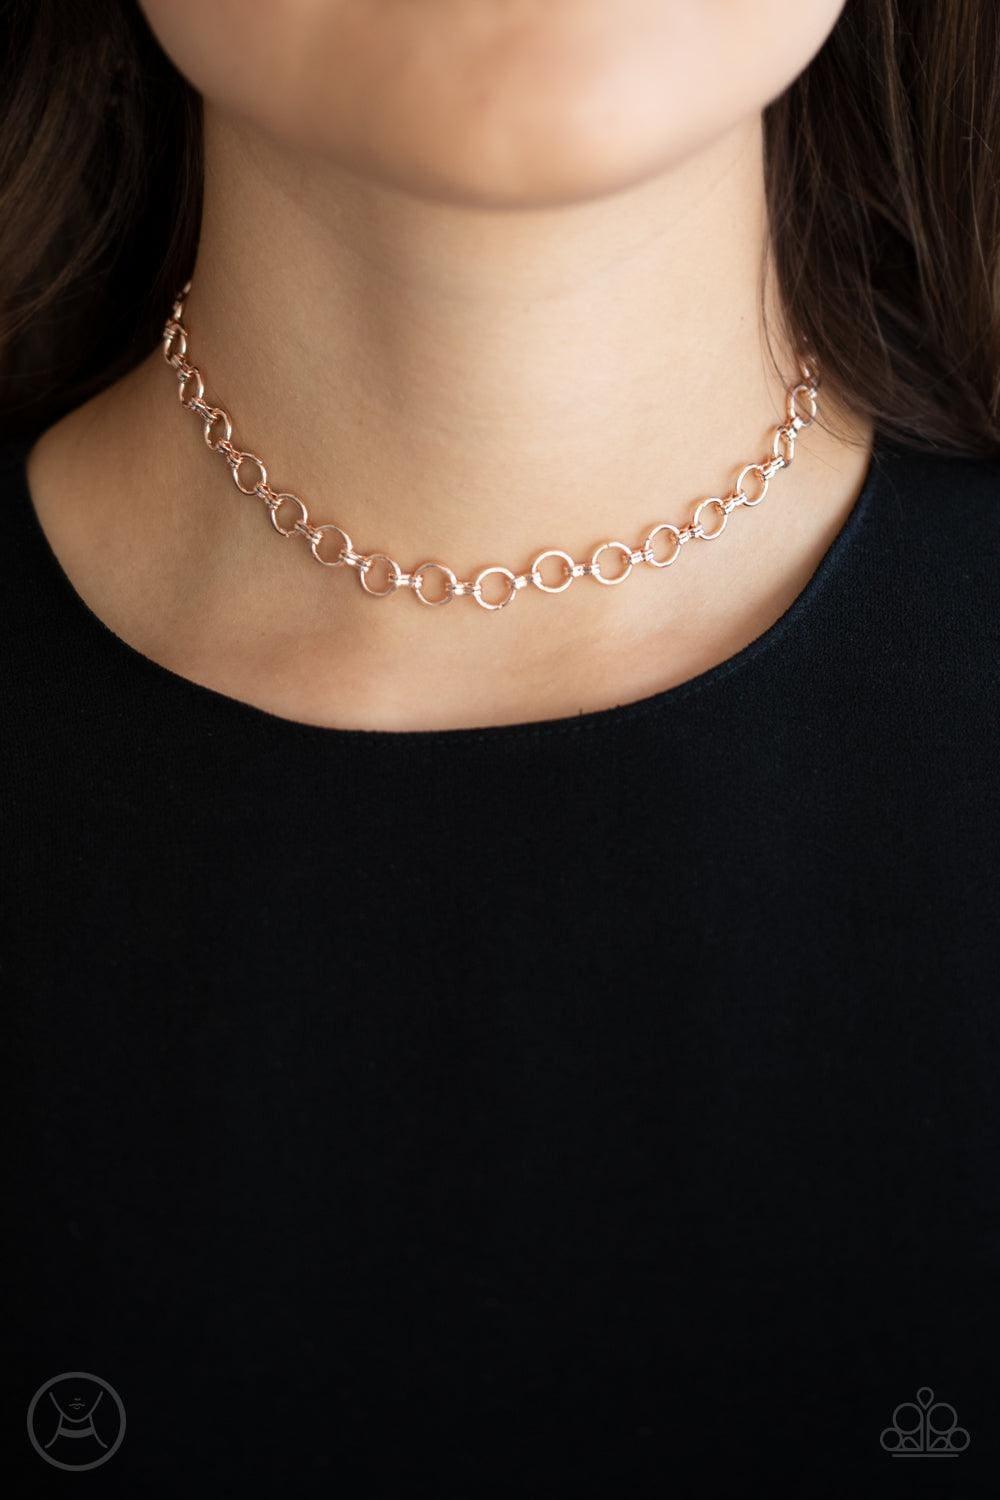 Paparazzi Accessories - Insta Connection - Rose Gold Choker - Bling by JessieK